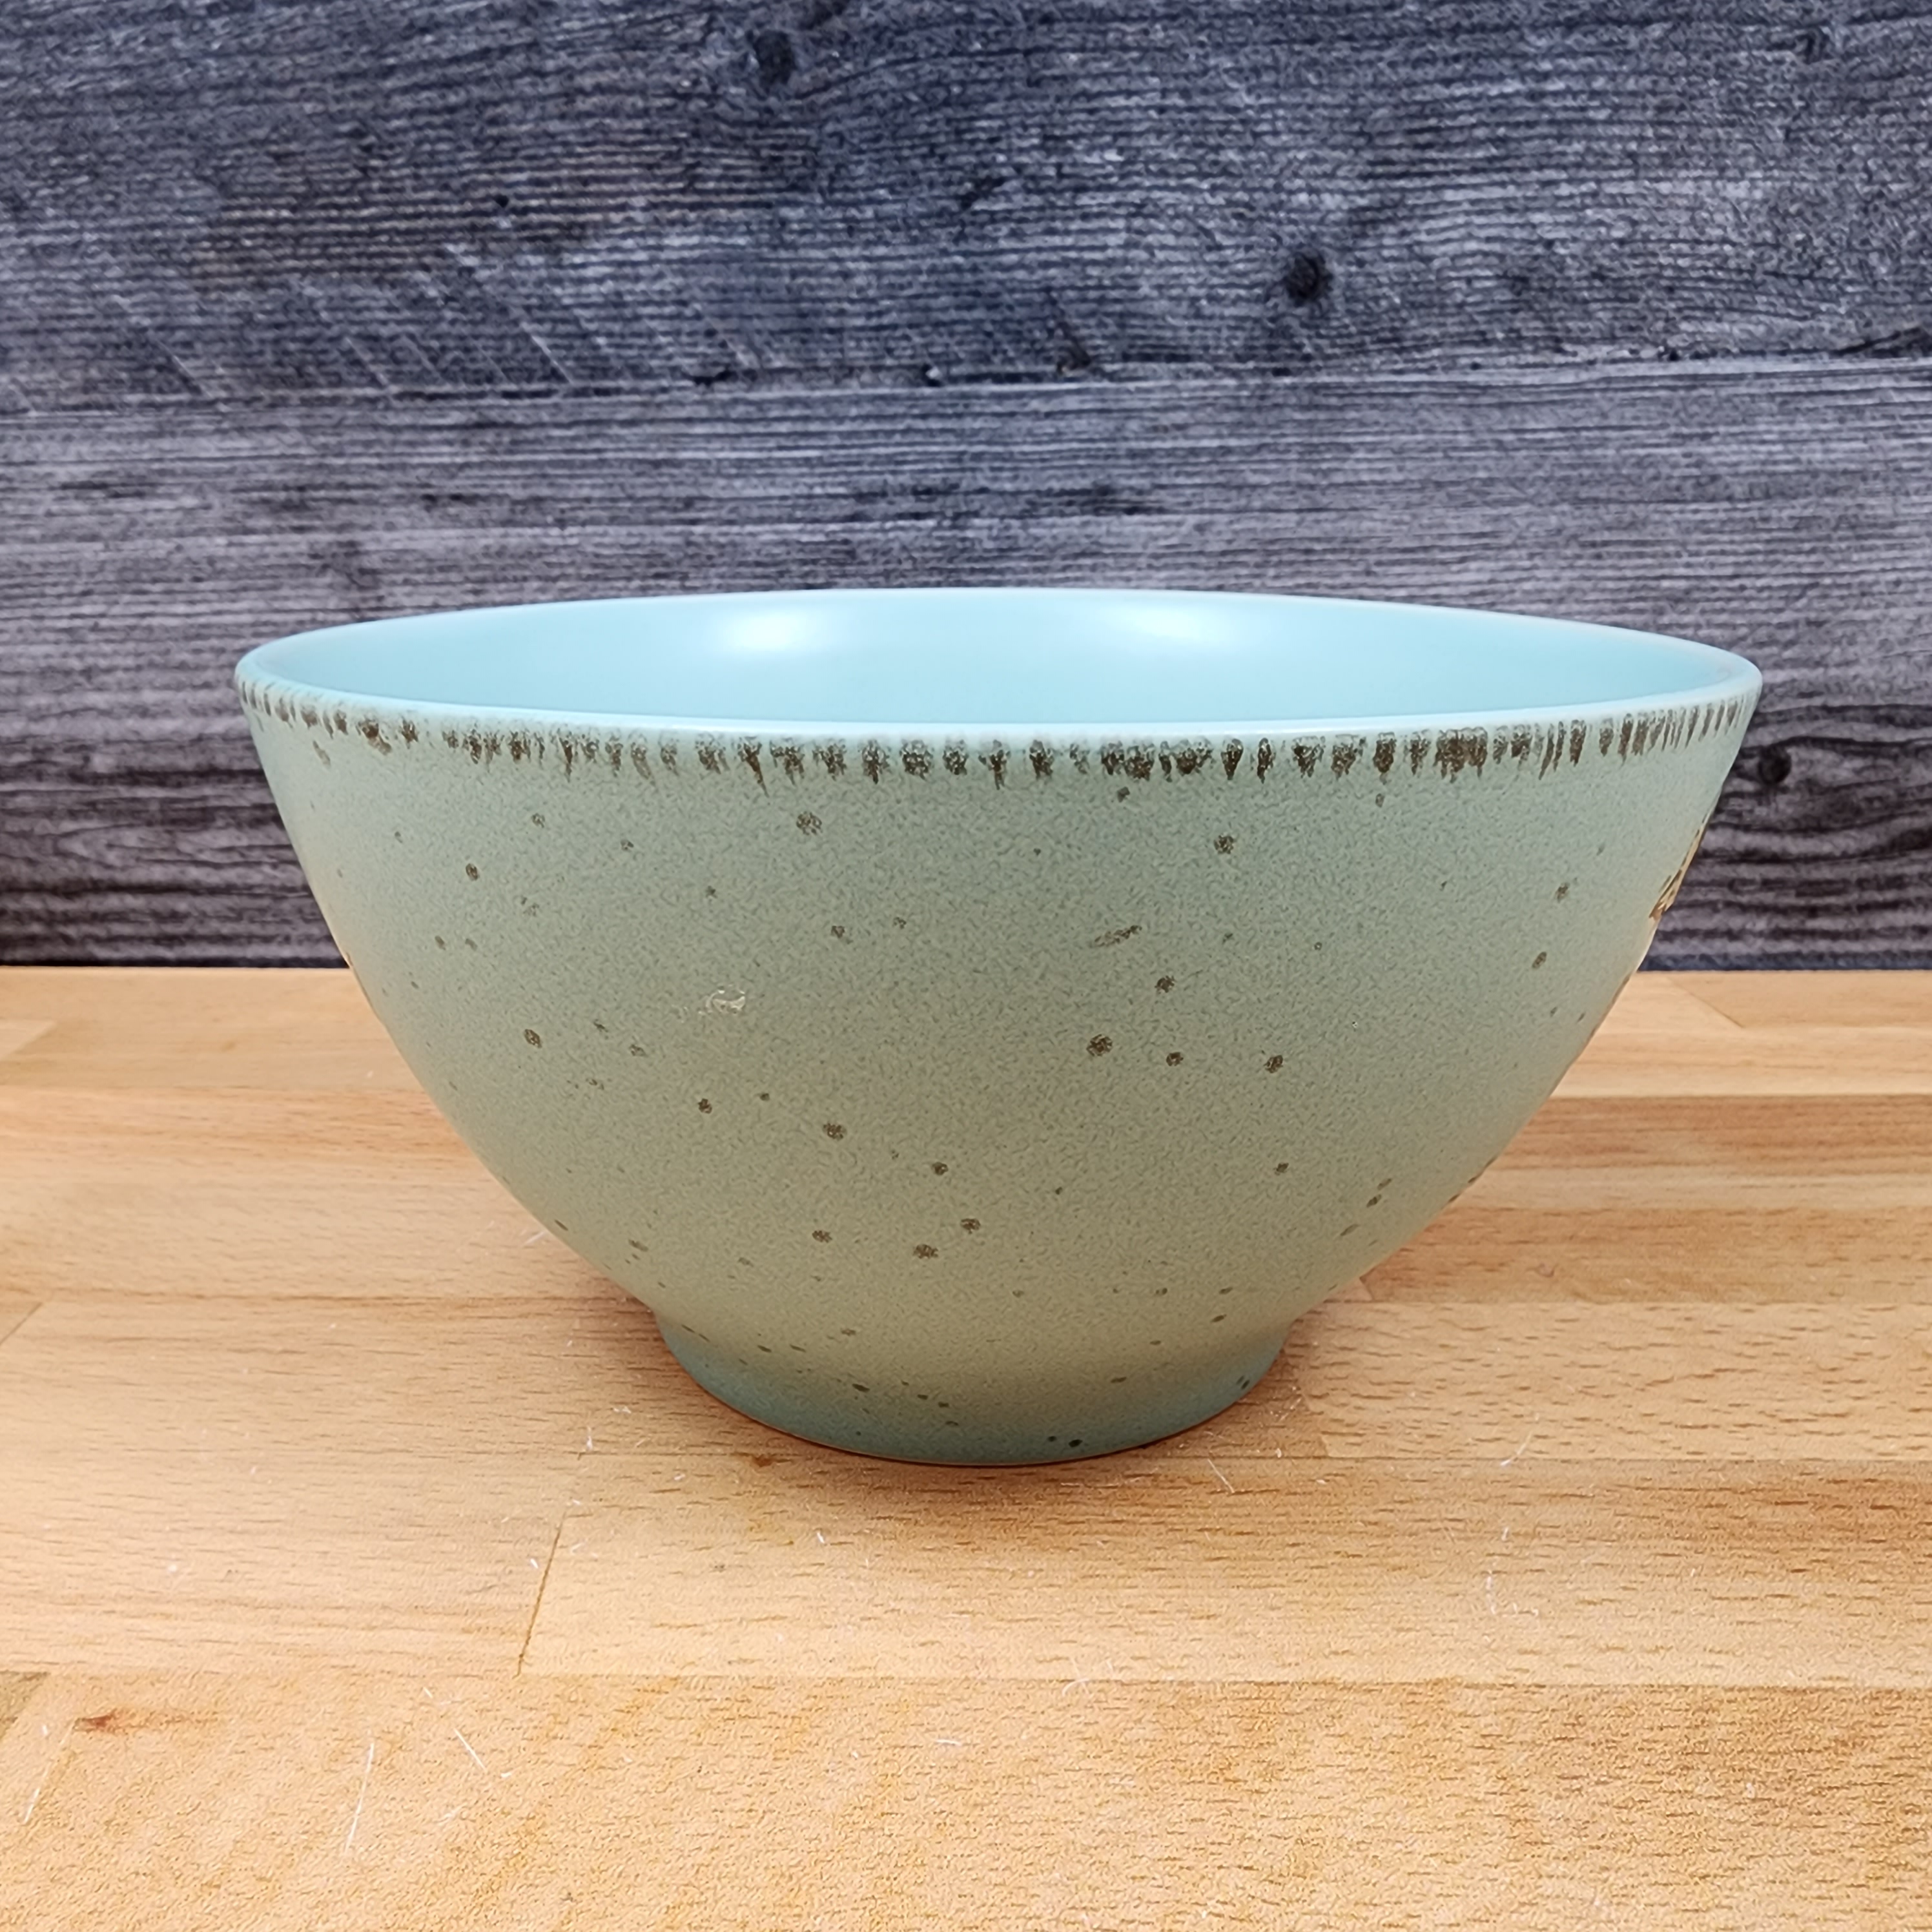 This Bird Embossed Serving Dish Bowl Aqua Color by Blue Sky 7 inch Diameter is made with love by Premier Homegoods! Shop more unique gift ideas today with Spots Initiatives, the best way to support creators.